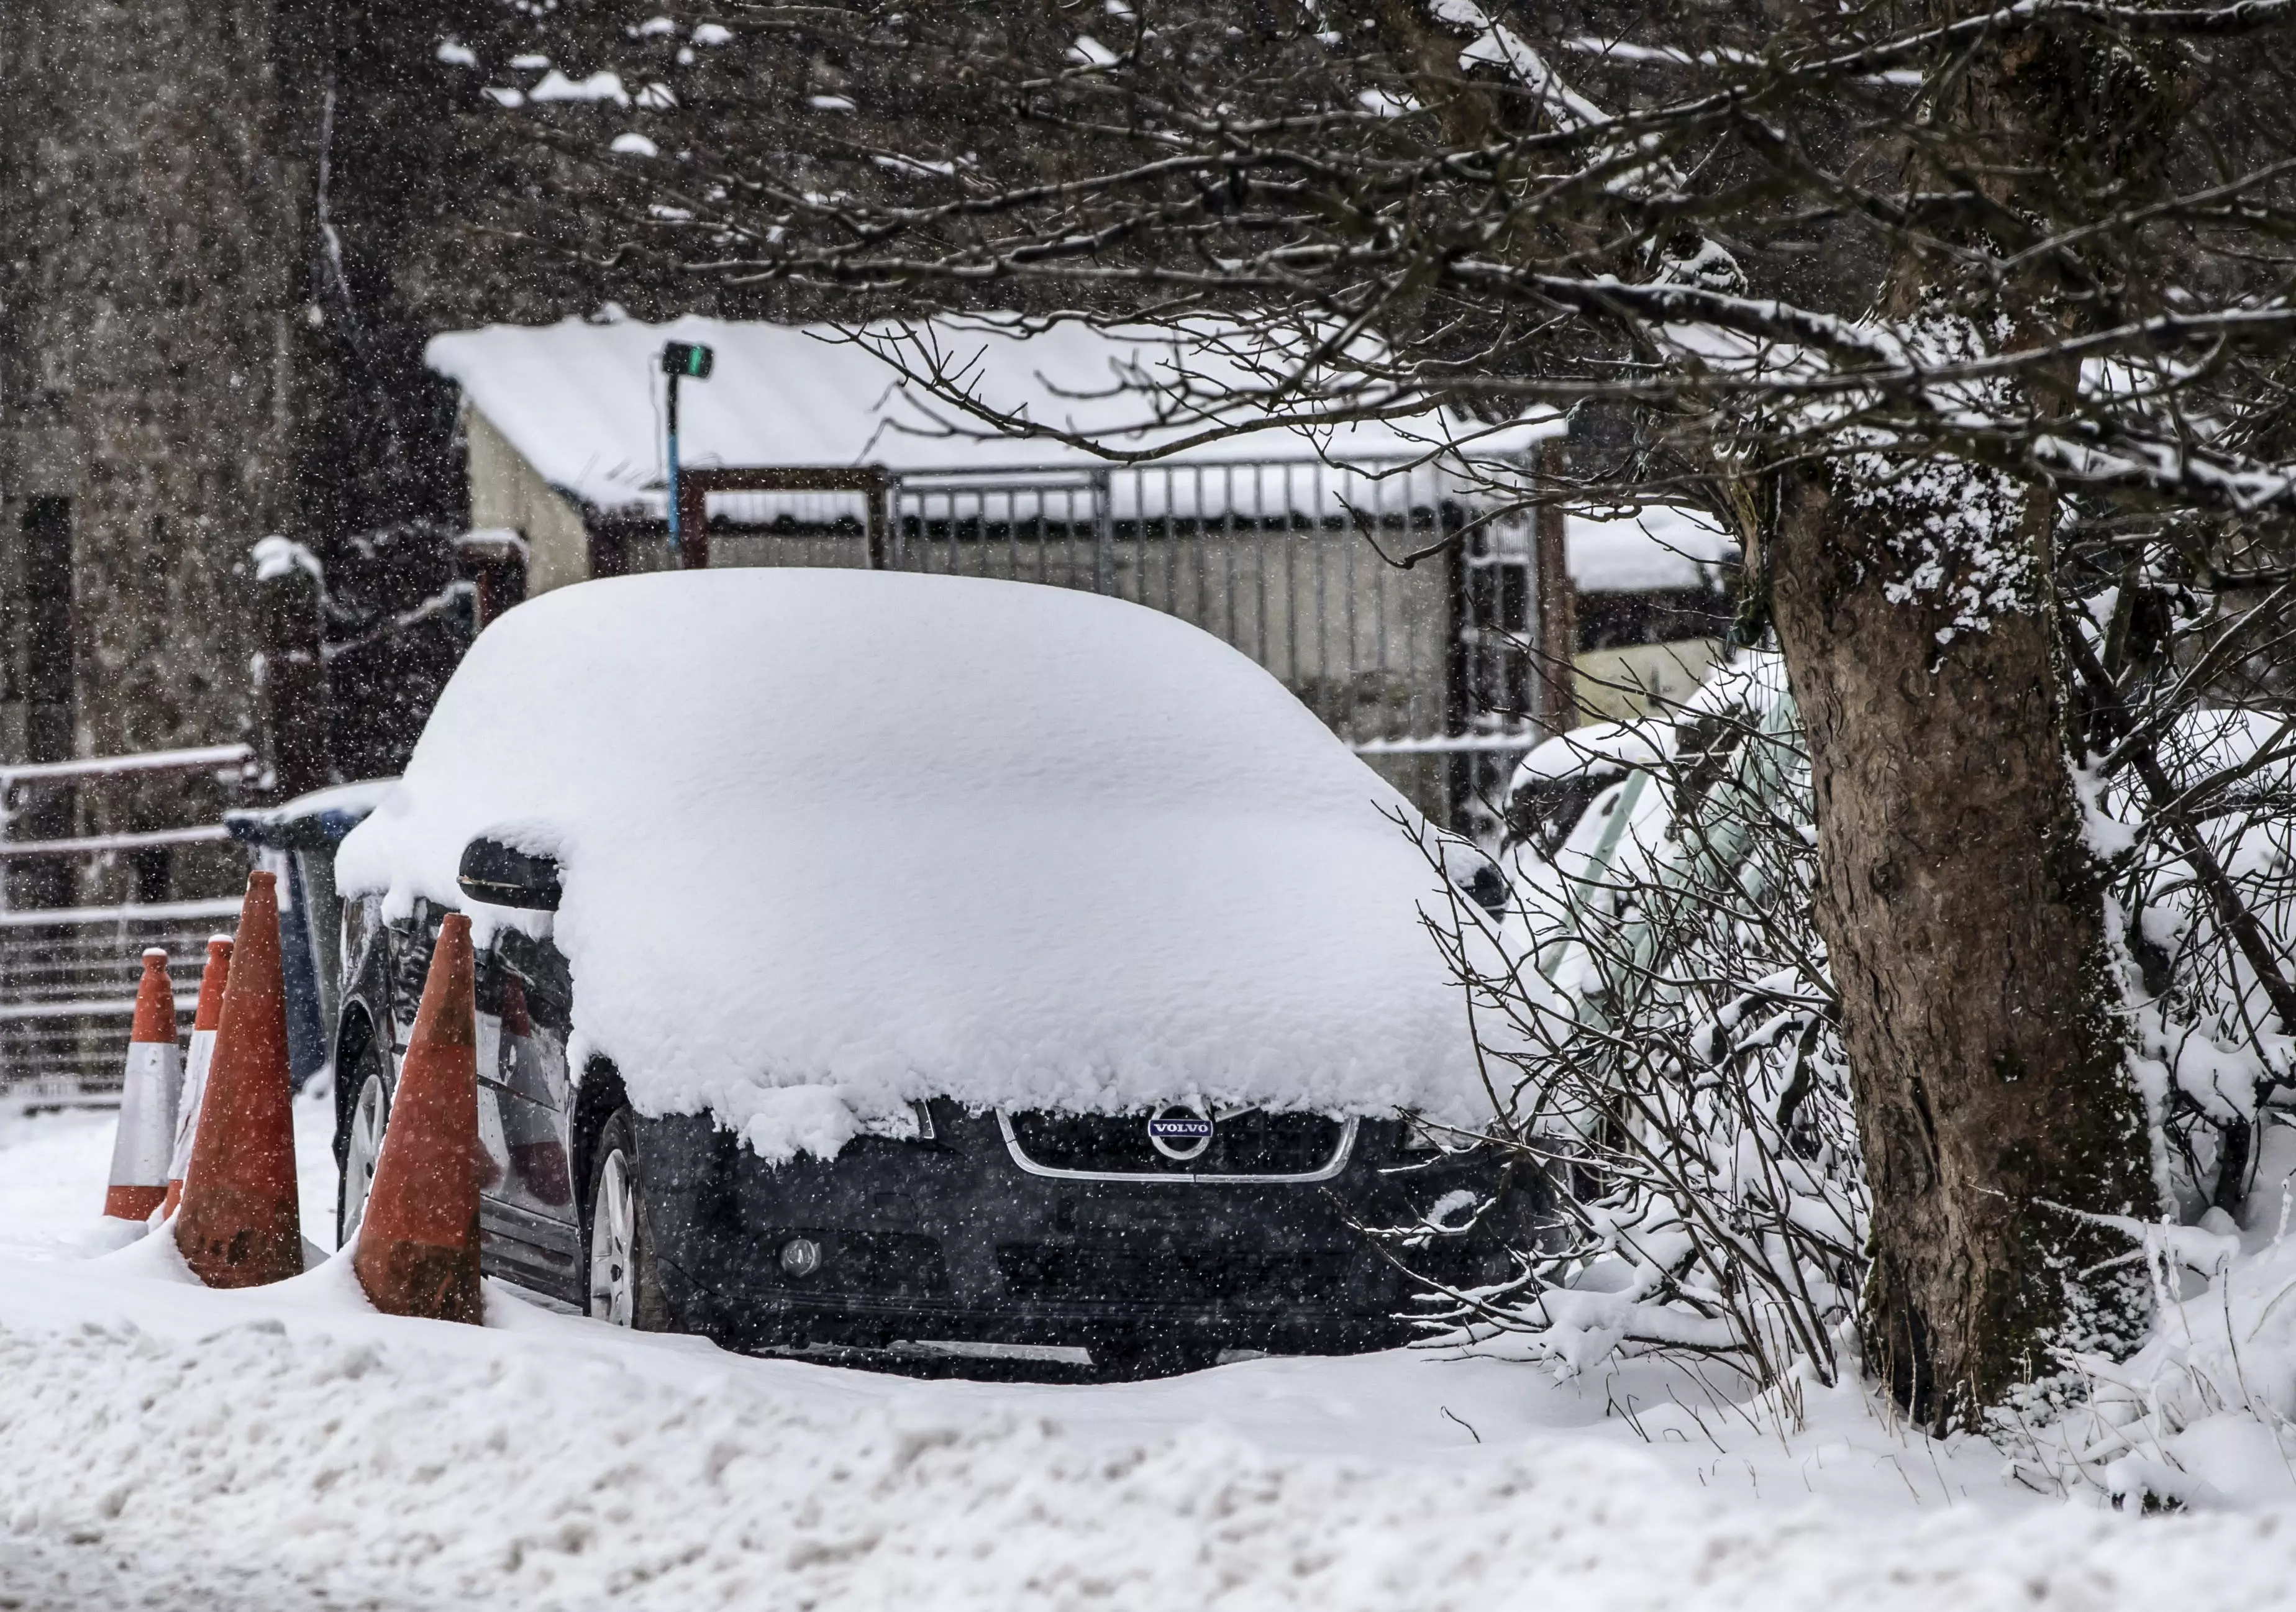 The Met Office has warned there will be more snow later this week.